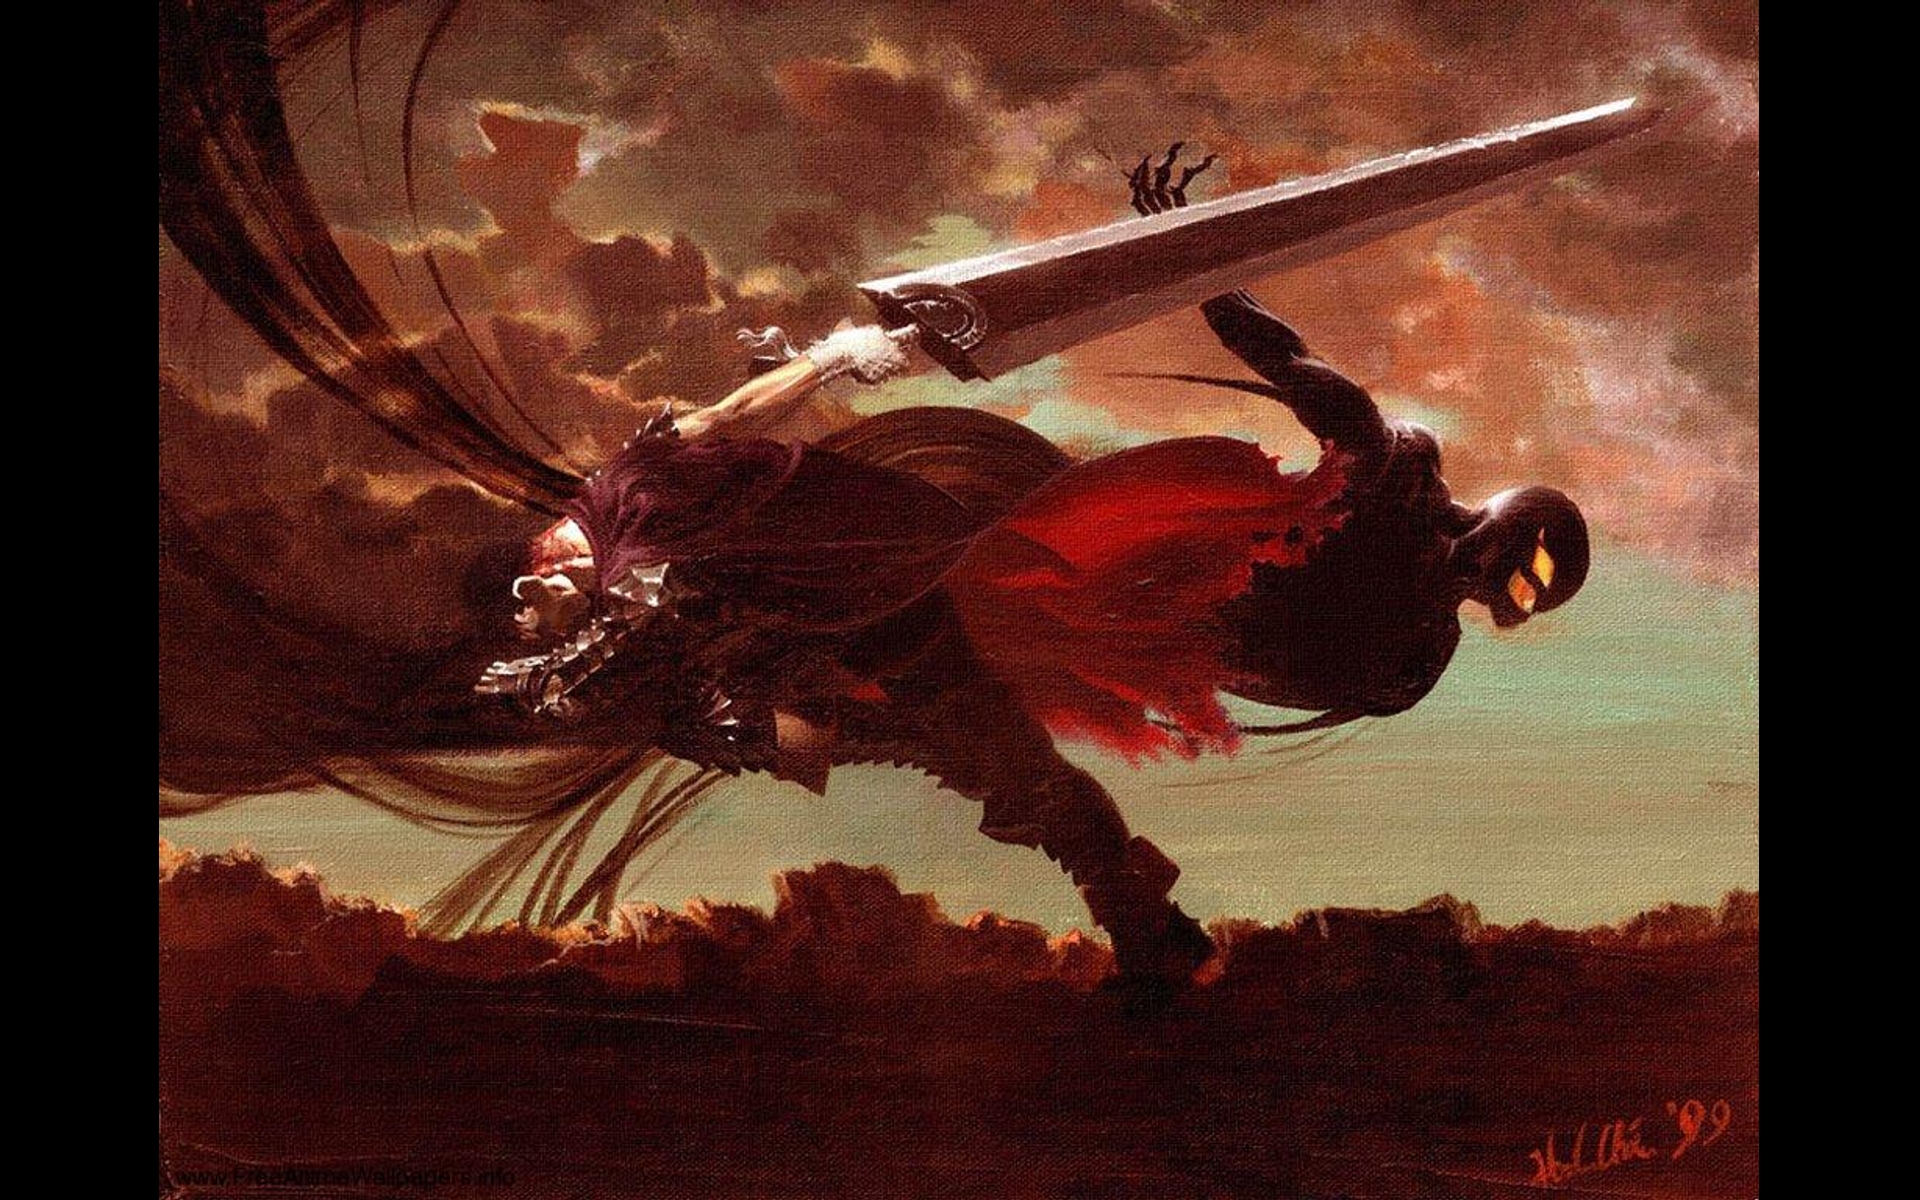 Free Download Berserk Full Hd Wallpaper And Background 19x10 Id 19x10 For Your Desktop Mobile Tablet Explore 91 Vongola Battle Wallpapers Vongola Battle Wallpapers Battle Bus Wallpapers Battle Wallpaper